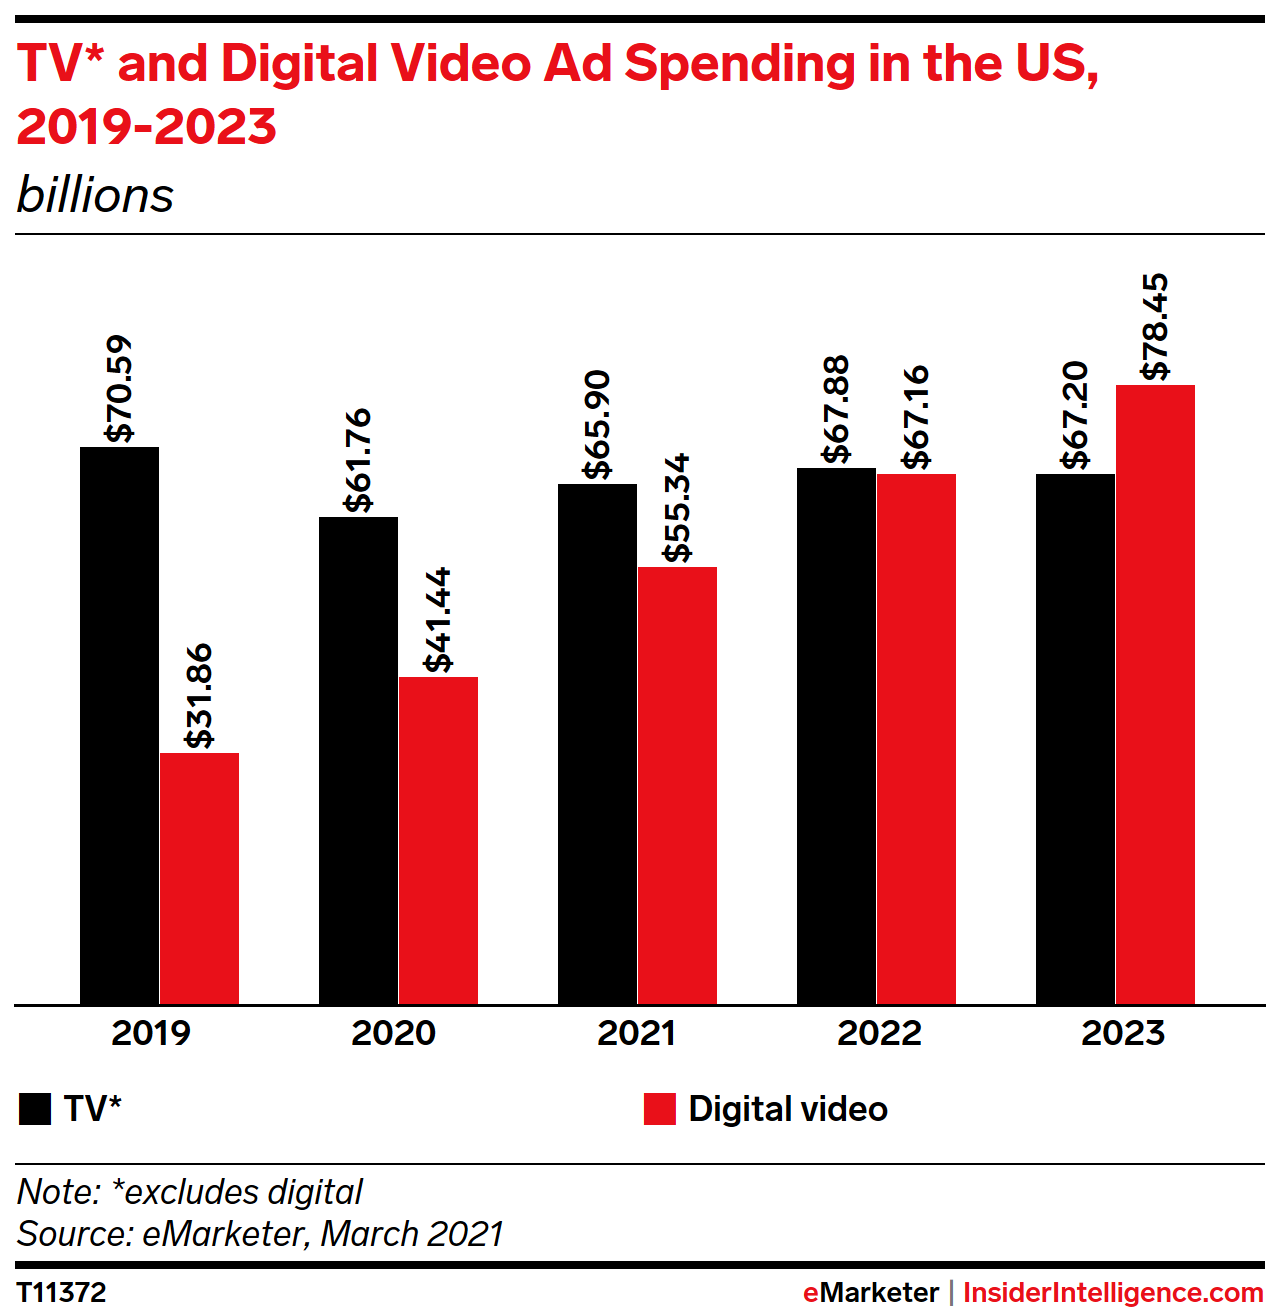 TV* and Digital Video Ad Spending in the US, 2019-2023 (billions)